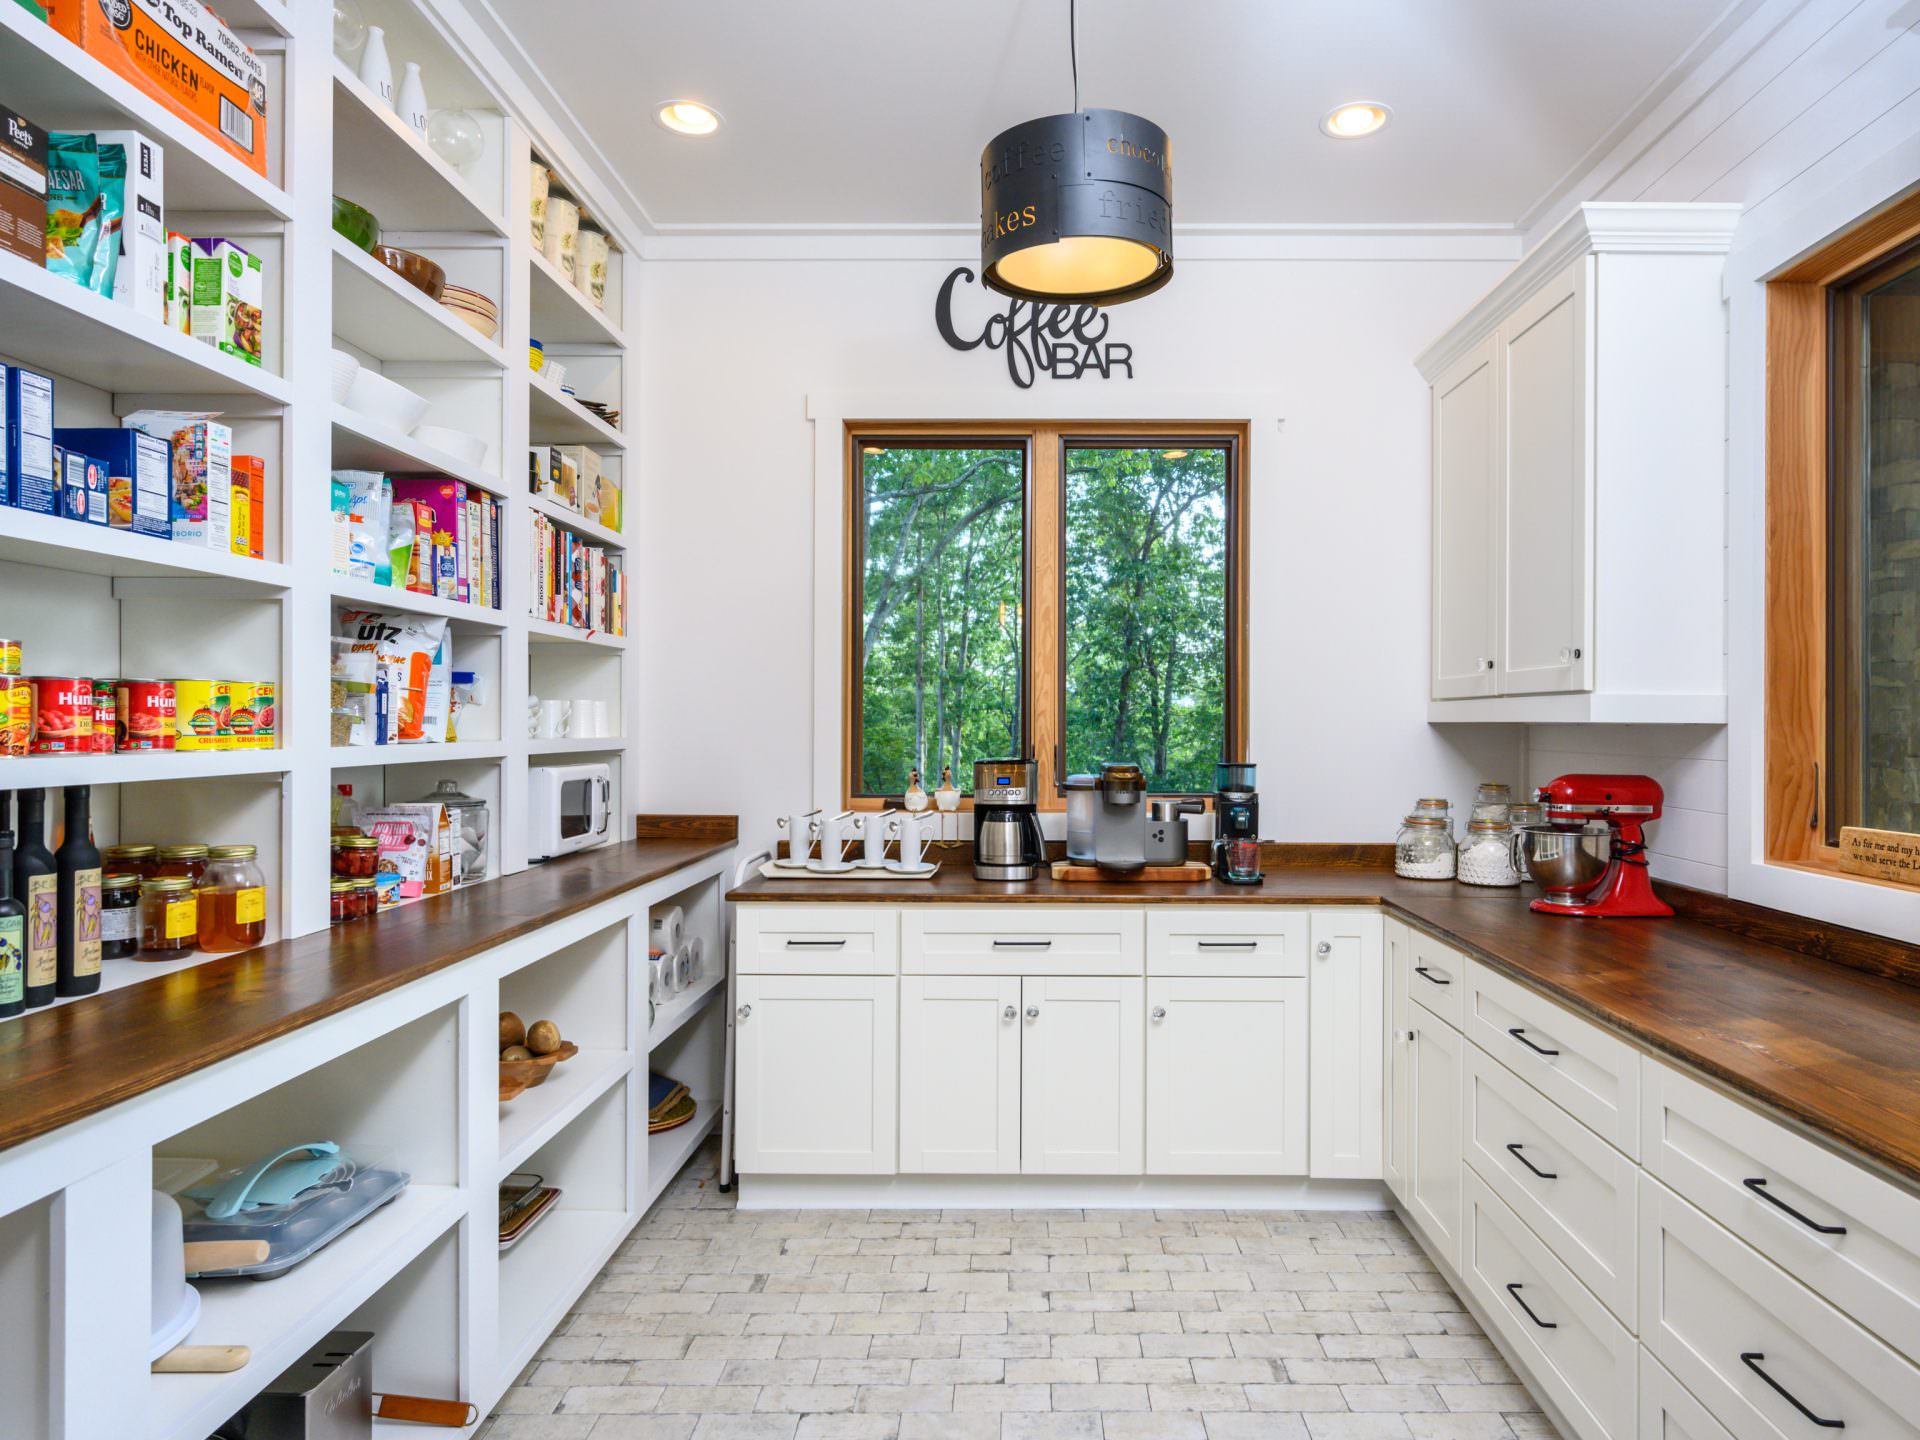 The latest trend for home buyers? An elaborate pantry